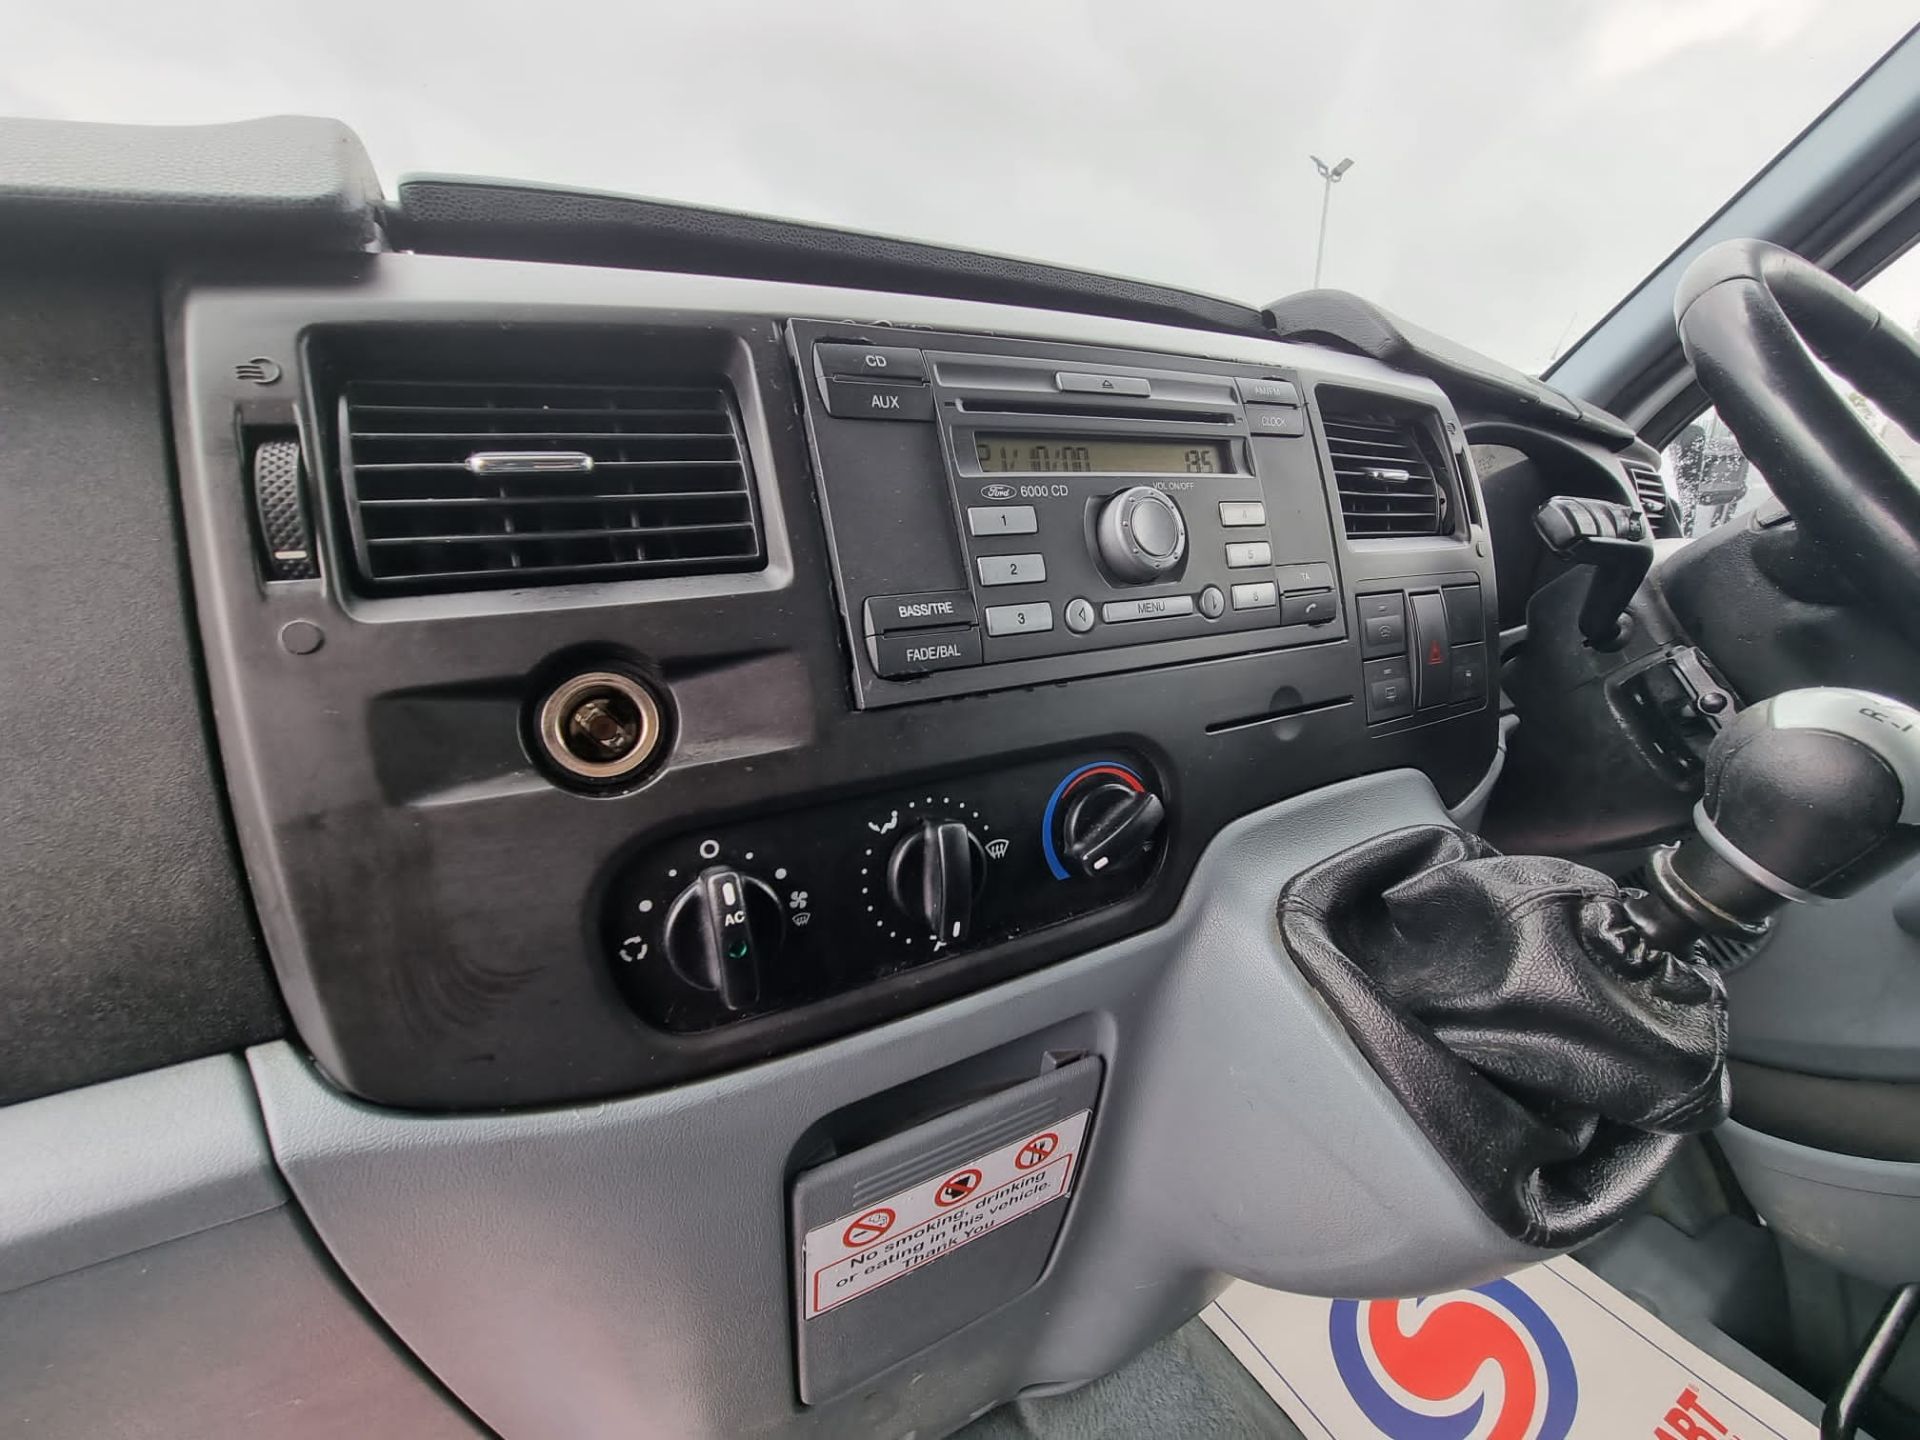 Ford Transit 2.2 TDCI Trend 2013 '13 Reg' 9 seats - Air Con - Cruise Control - Image 13 of 13